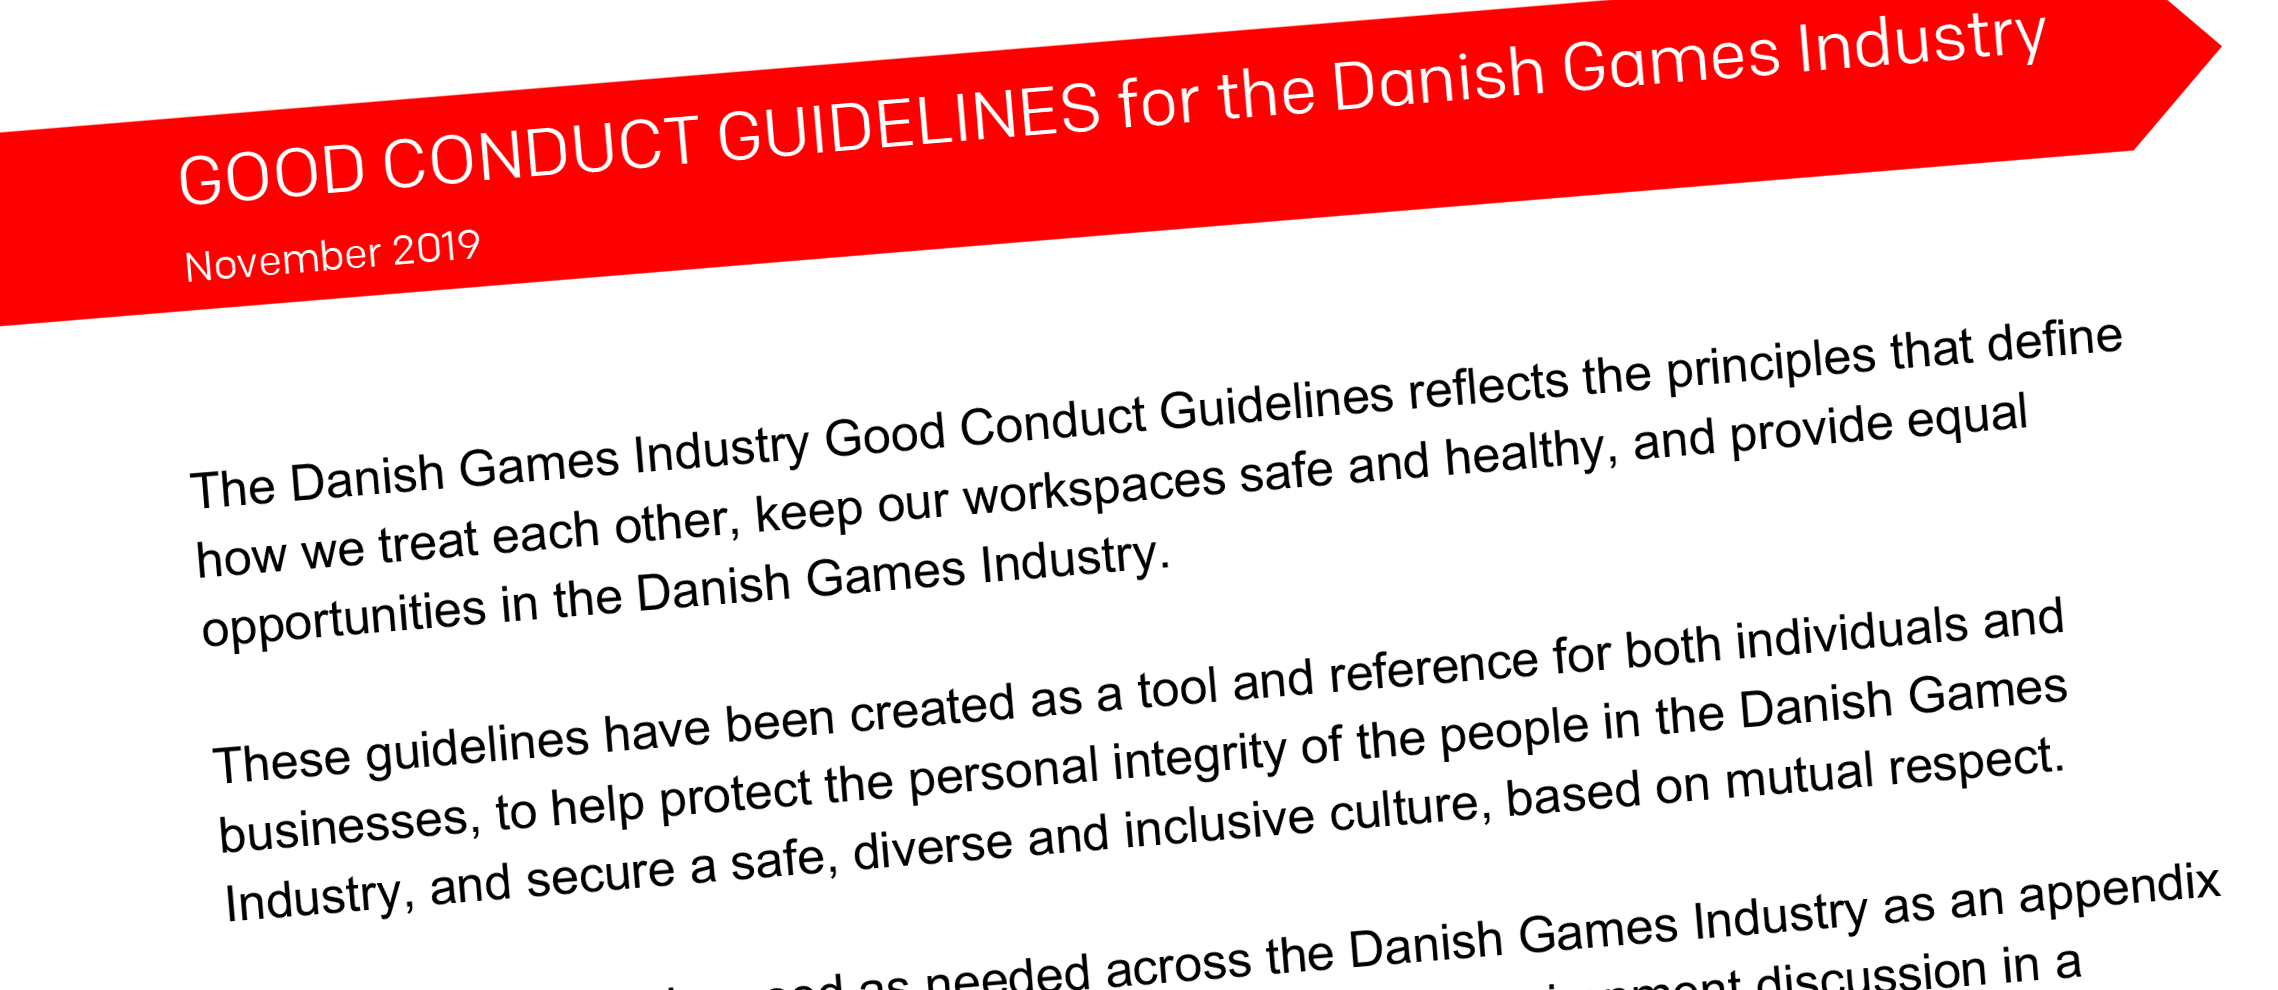 Good Conduct Guidelines